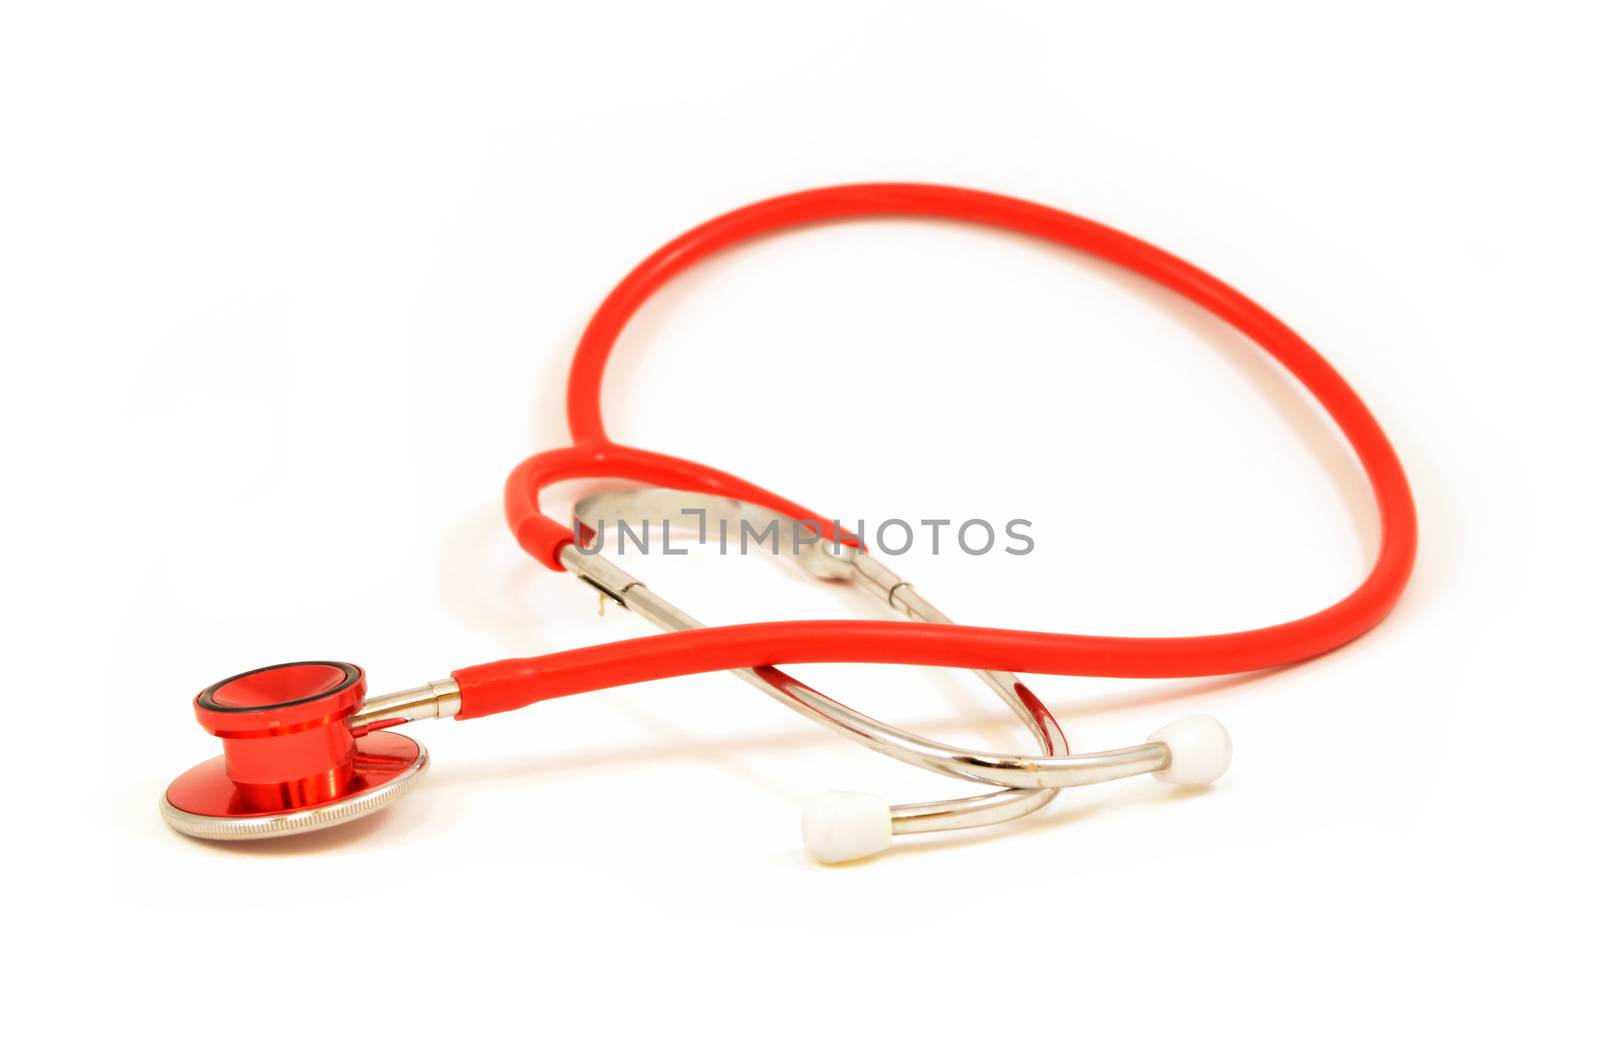 An isolated red stethoscope for use as a graphic element in medical designs.